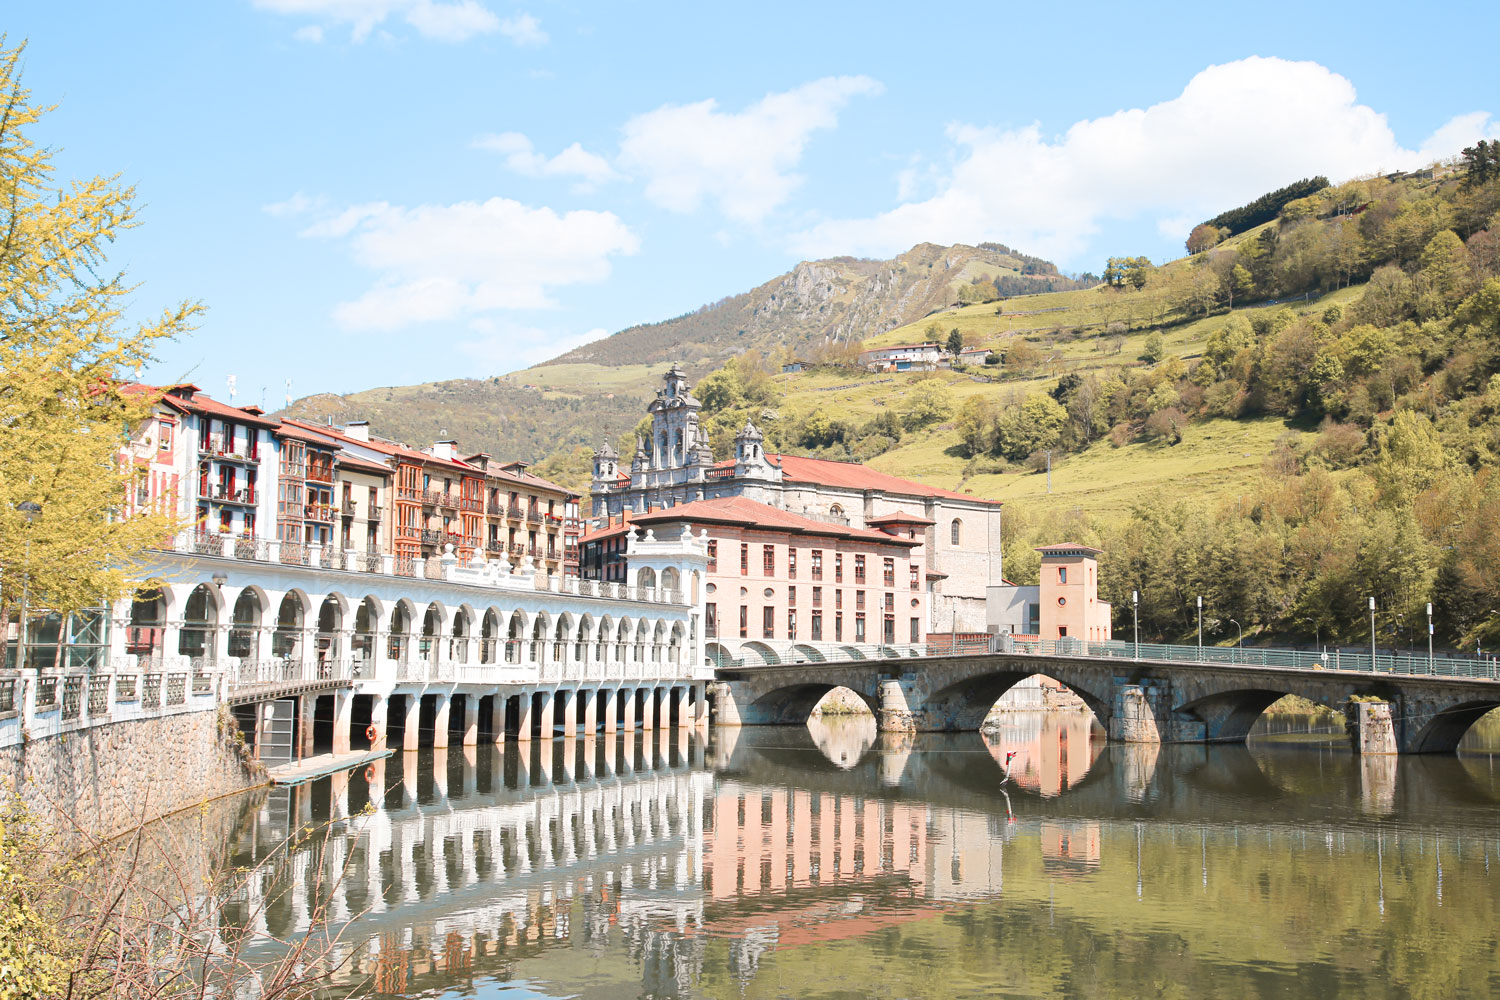 Get to know Tolosa